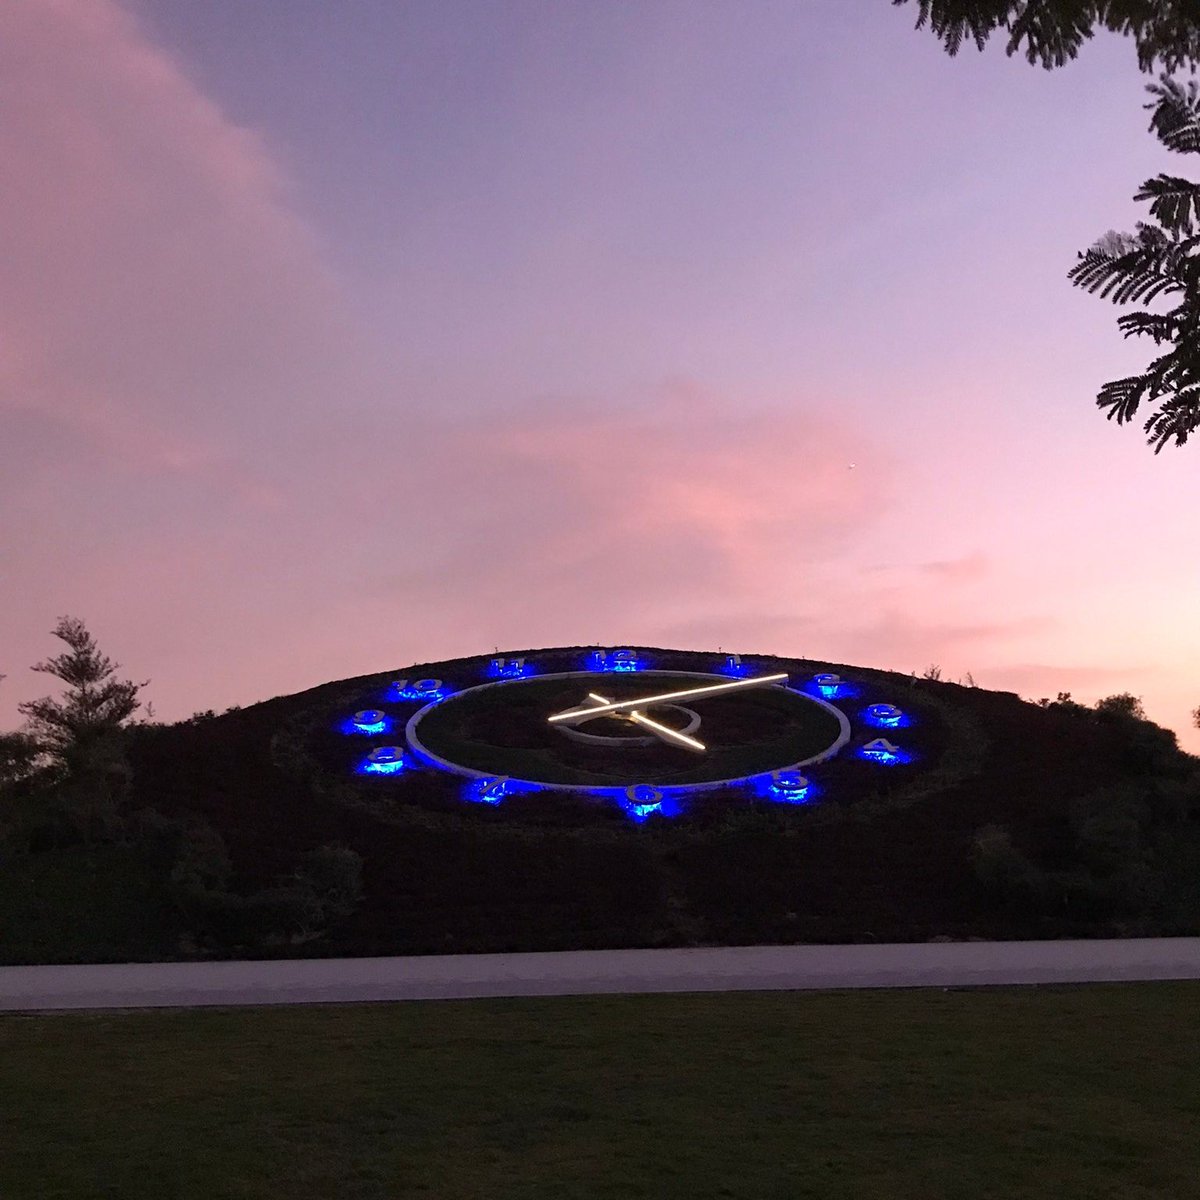 We're thrilled to share that we've successfully restored the beautiful floral clock at Rawdat Al Hamama Park in Lusail, Qatar.⁠ ⁠ #clockrepair #parklife #qatar #smithofderby #floralclock